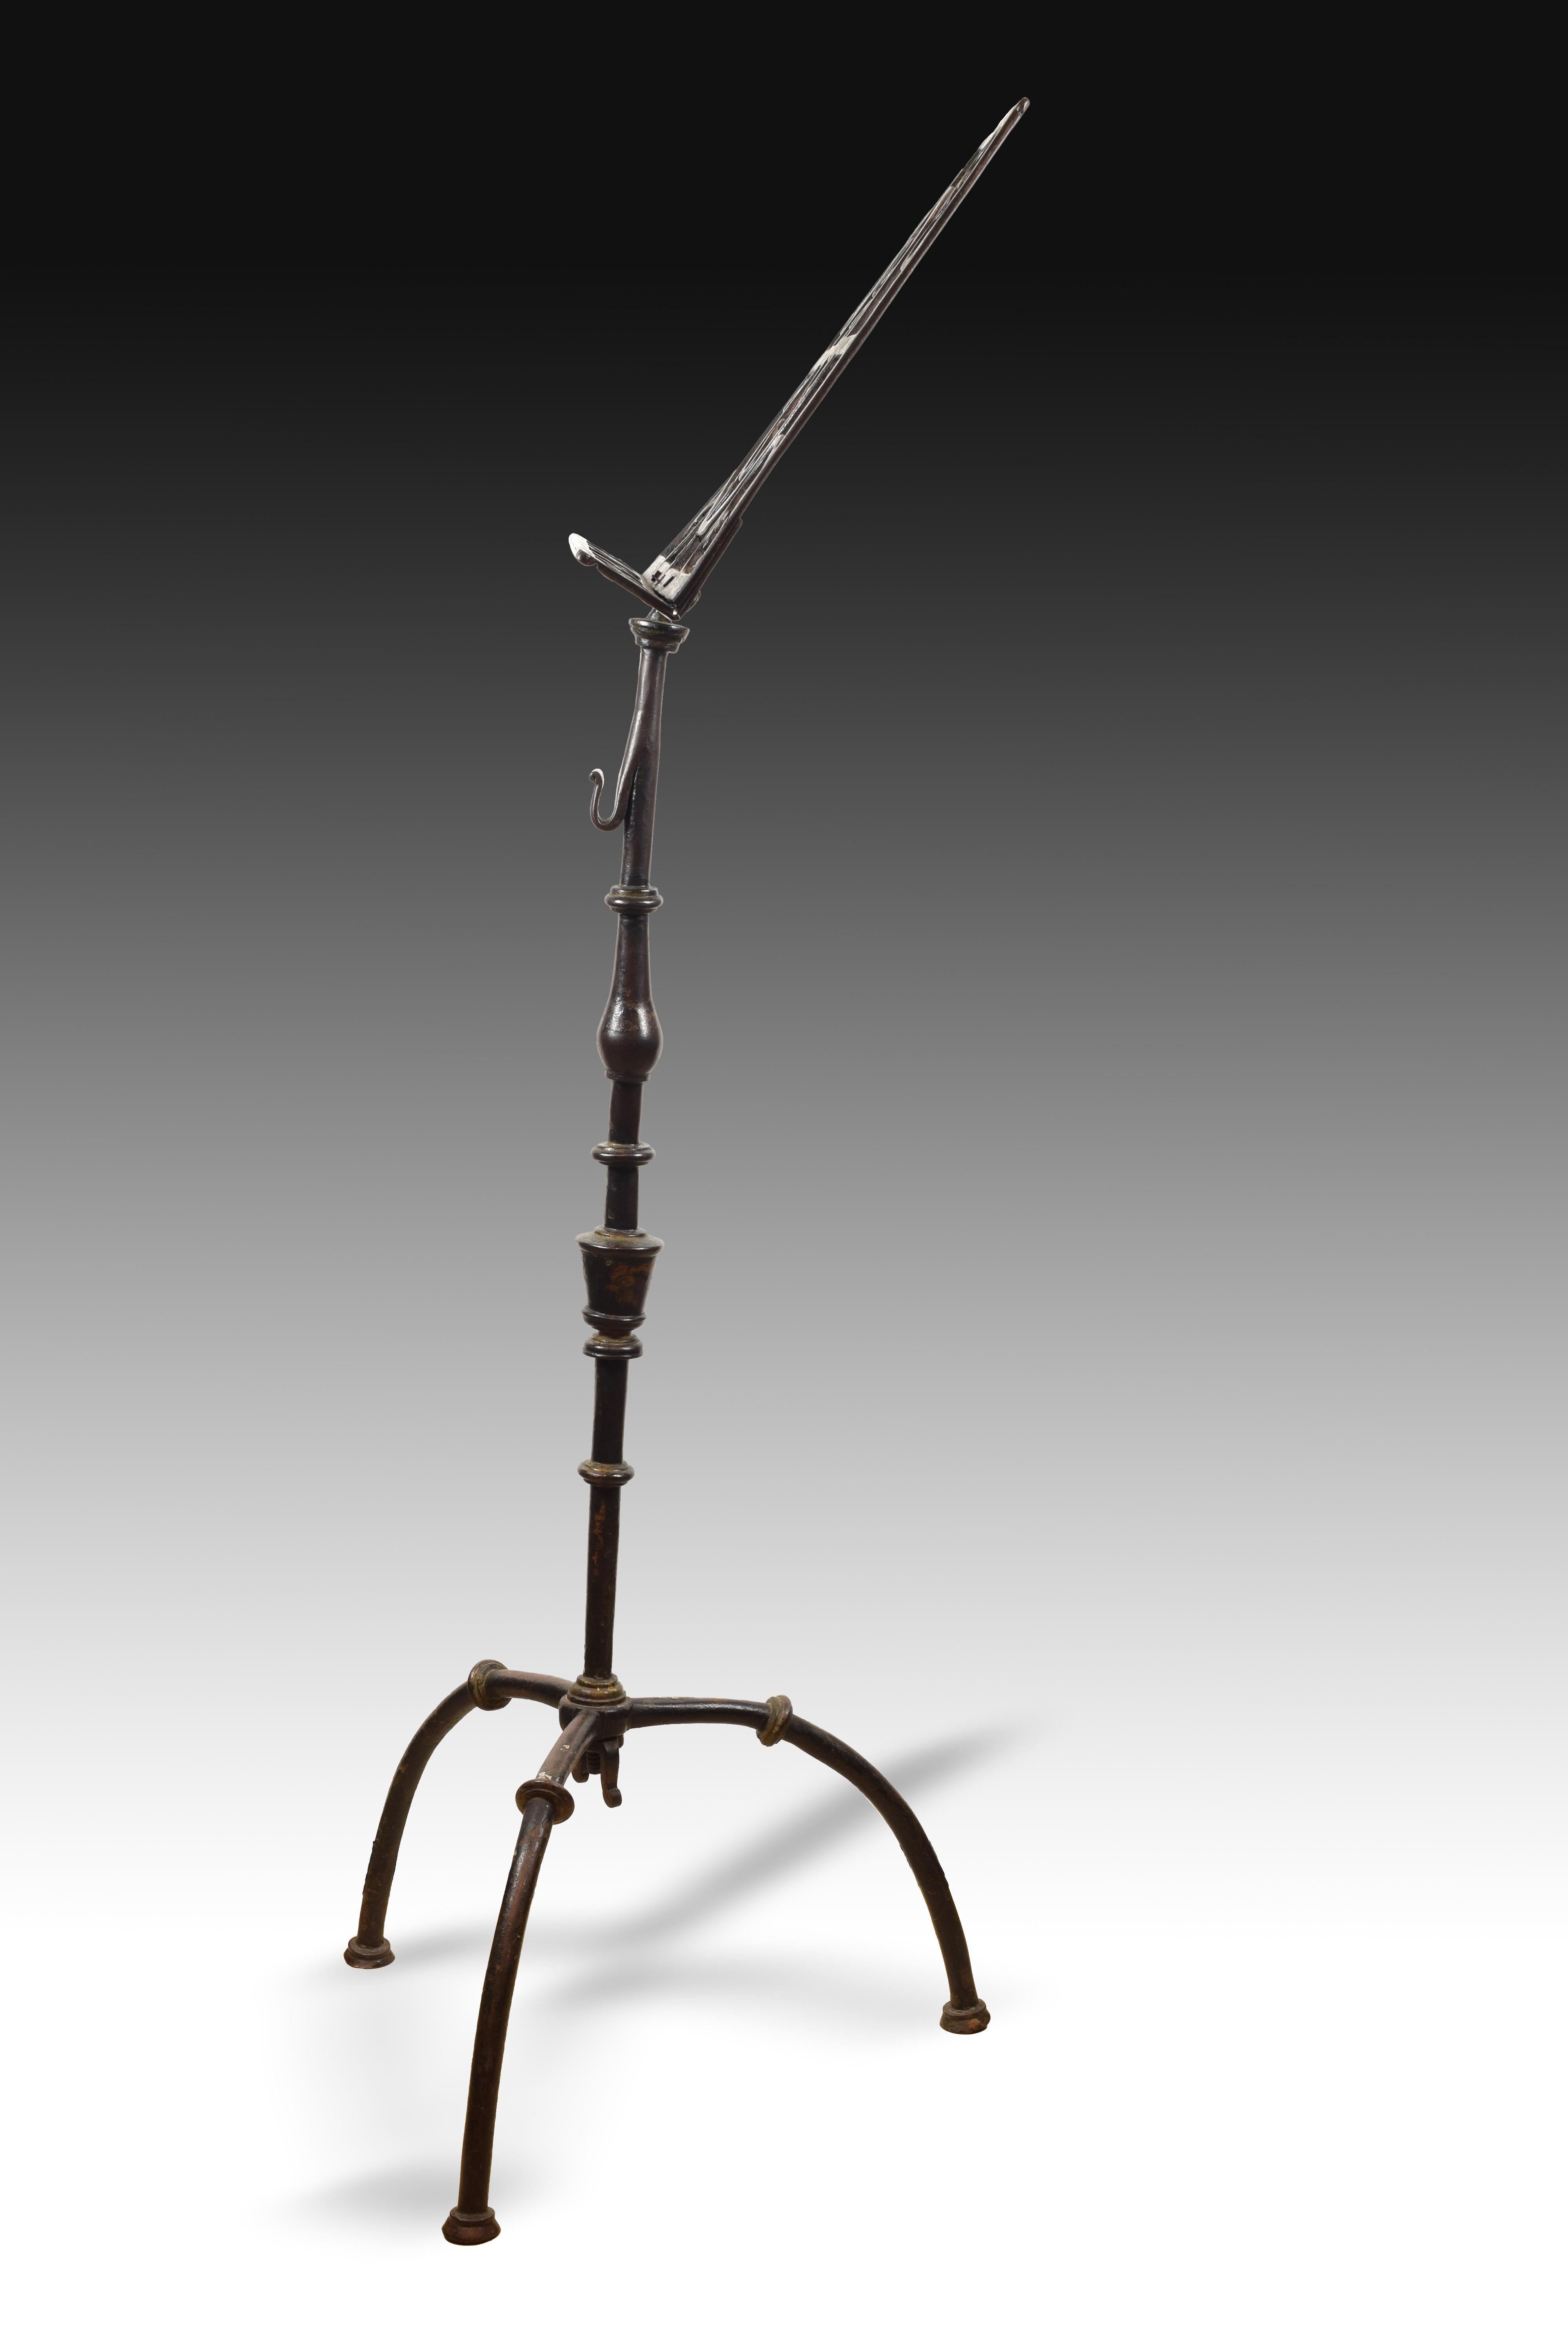 On a tripod with curved legs decorated with a disc in the center, stands the piece, also decorated with those same discs and, in addition, with a central vase and a baluster on the top. The lectern that finishes is decorated by heart-shaped iron